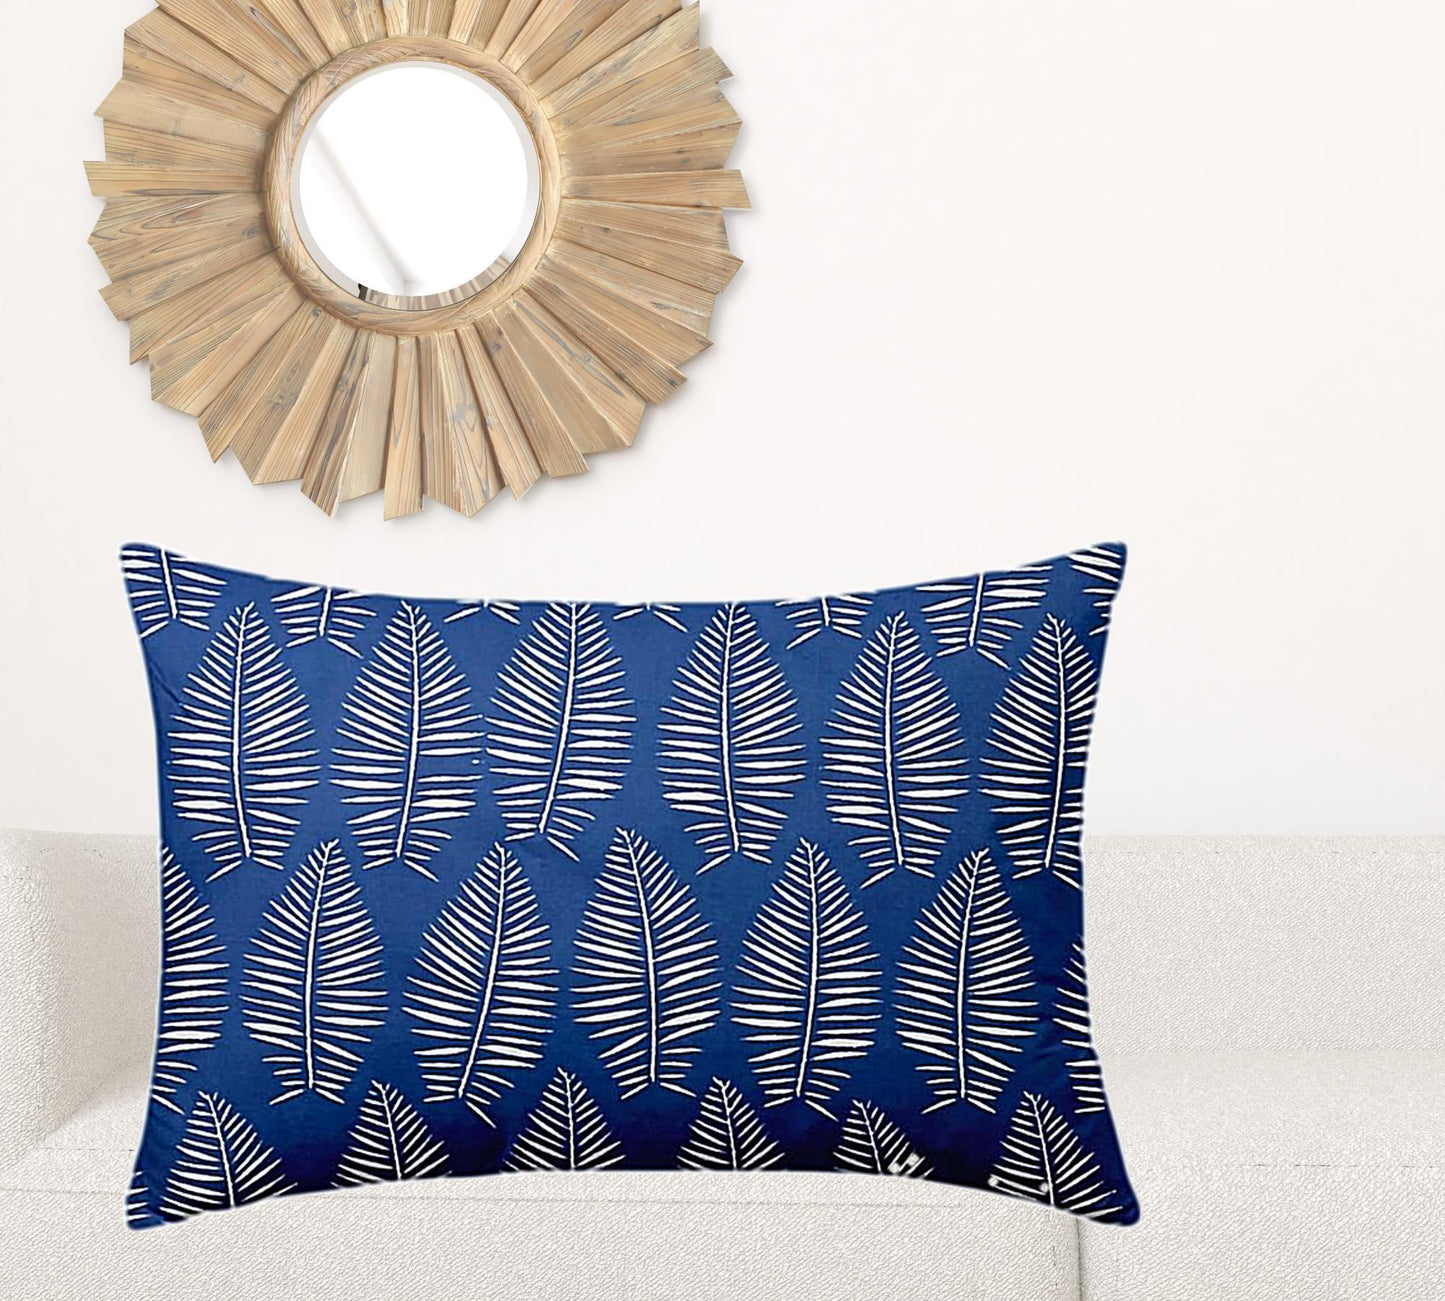 24" X 36" Blue And White Enveloped Tropical Lumbar Indoor Outdoor Pillow